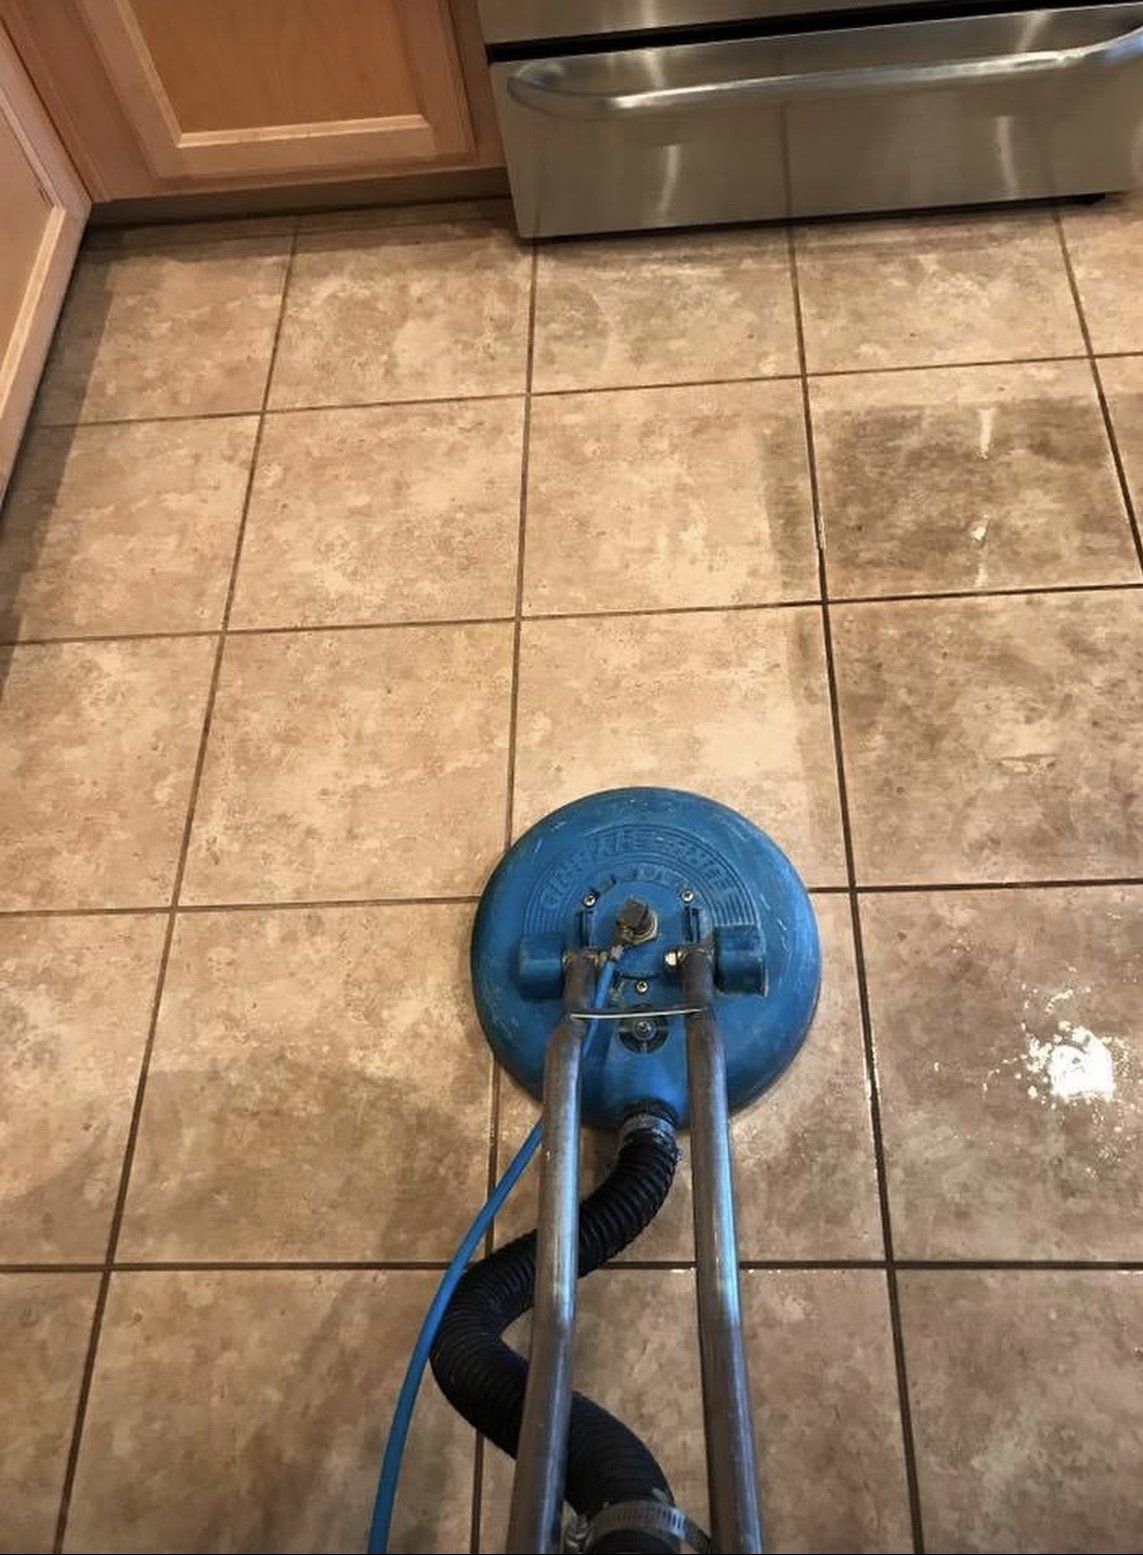 Tile & Grout Cleaning Services in San Diego - It's All Clean San Diego